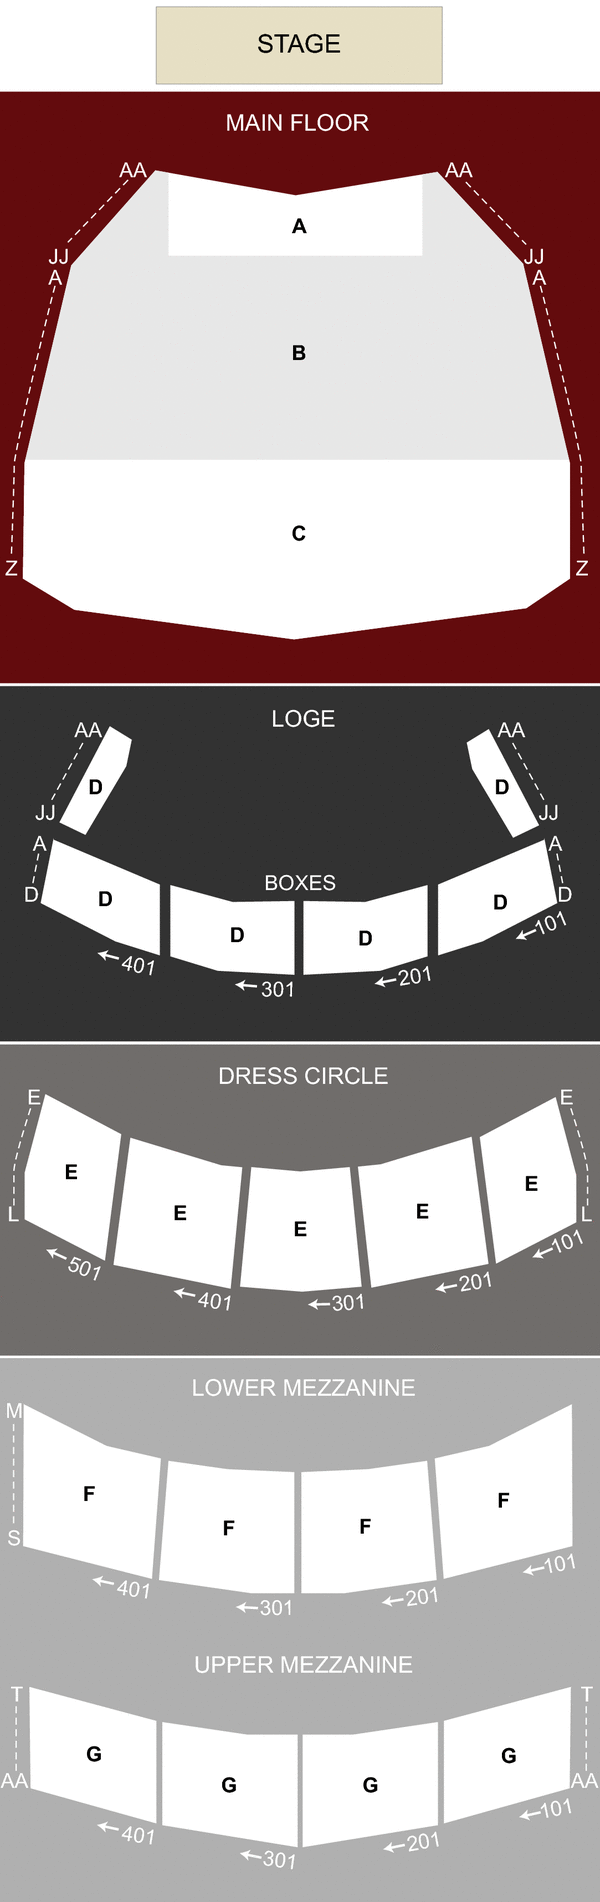 Orpheum Theater, Sioux City, IA - Seating Chart & Stage - Sioux City ...